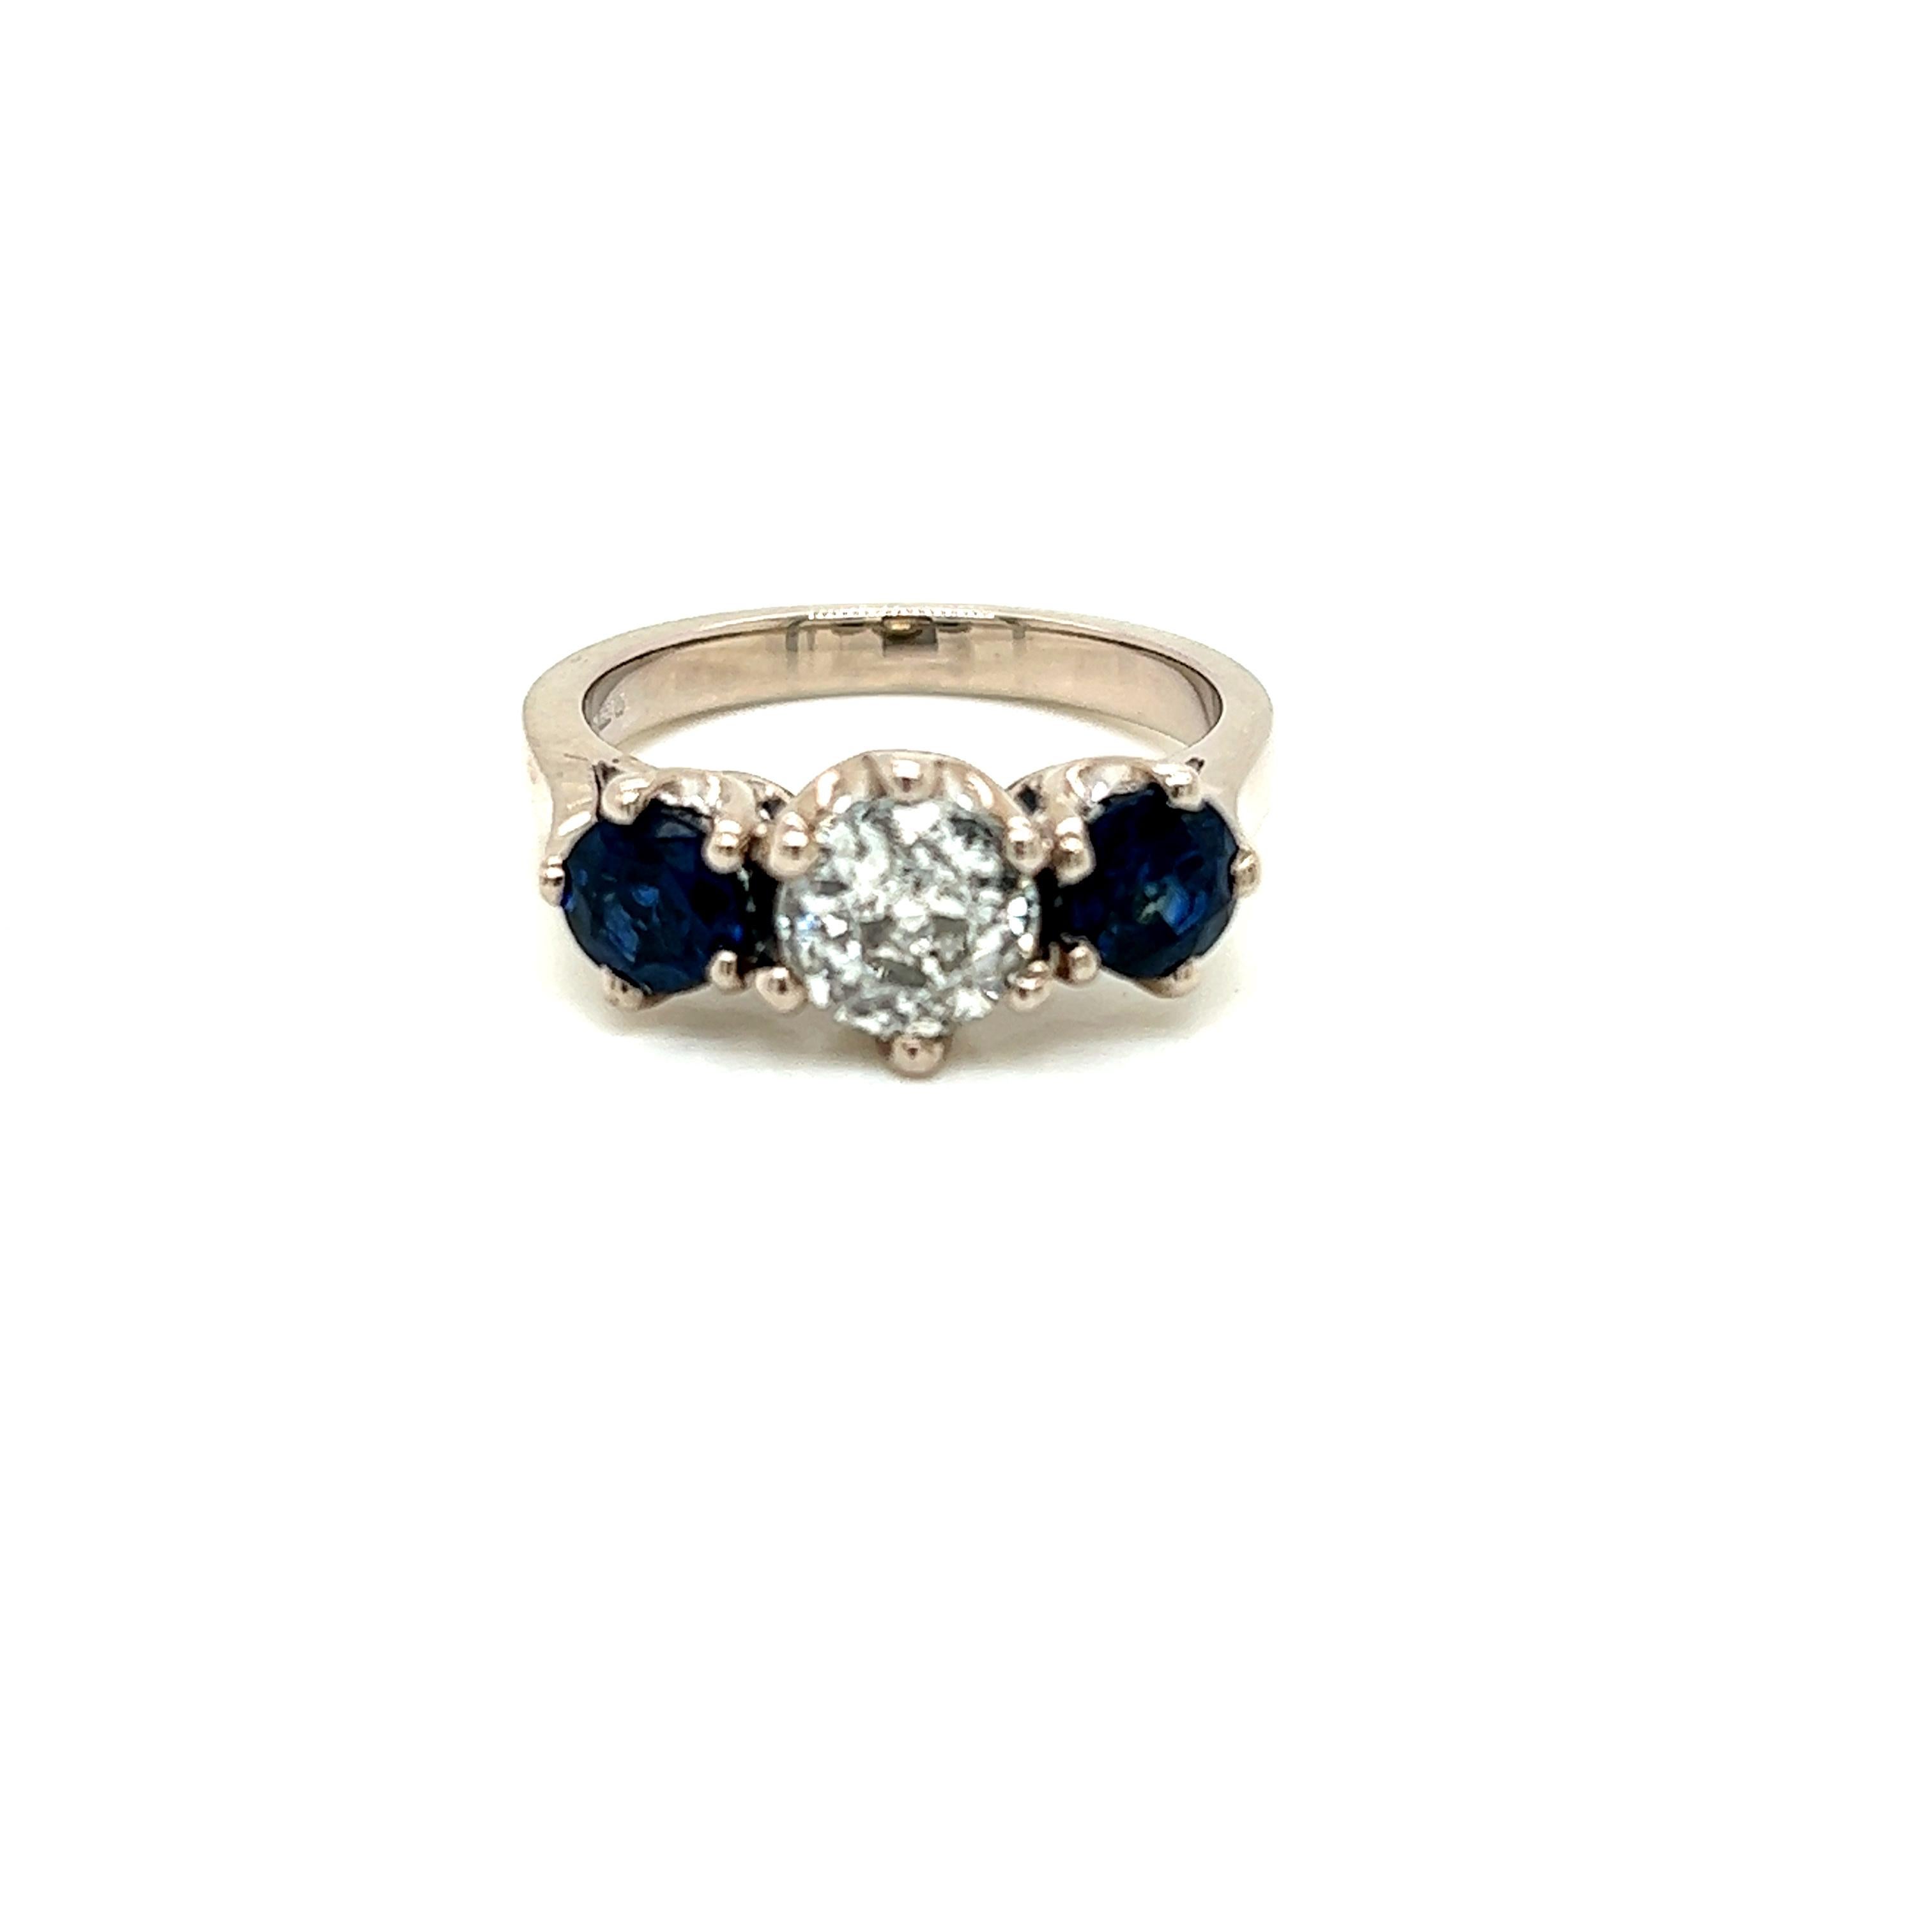 This charming ring features a lovely 0.85 carat Round Brilliant Diamond with a Round Brilliant Blue Sapphire on either side of it set on an 18K White Gold band.

The diamond at the centre of the ring weighs 0.85 carats and is of J colour and I1